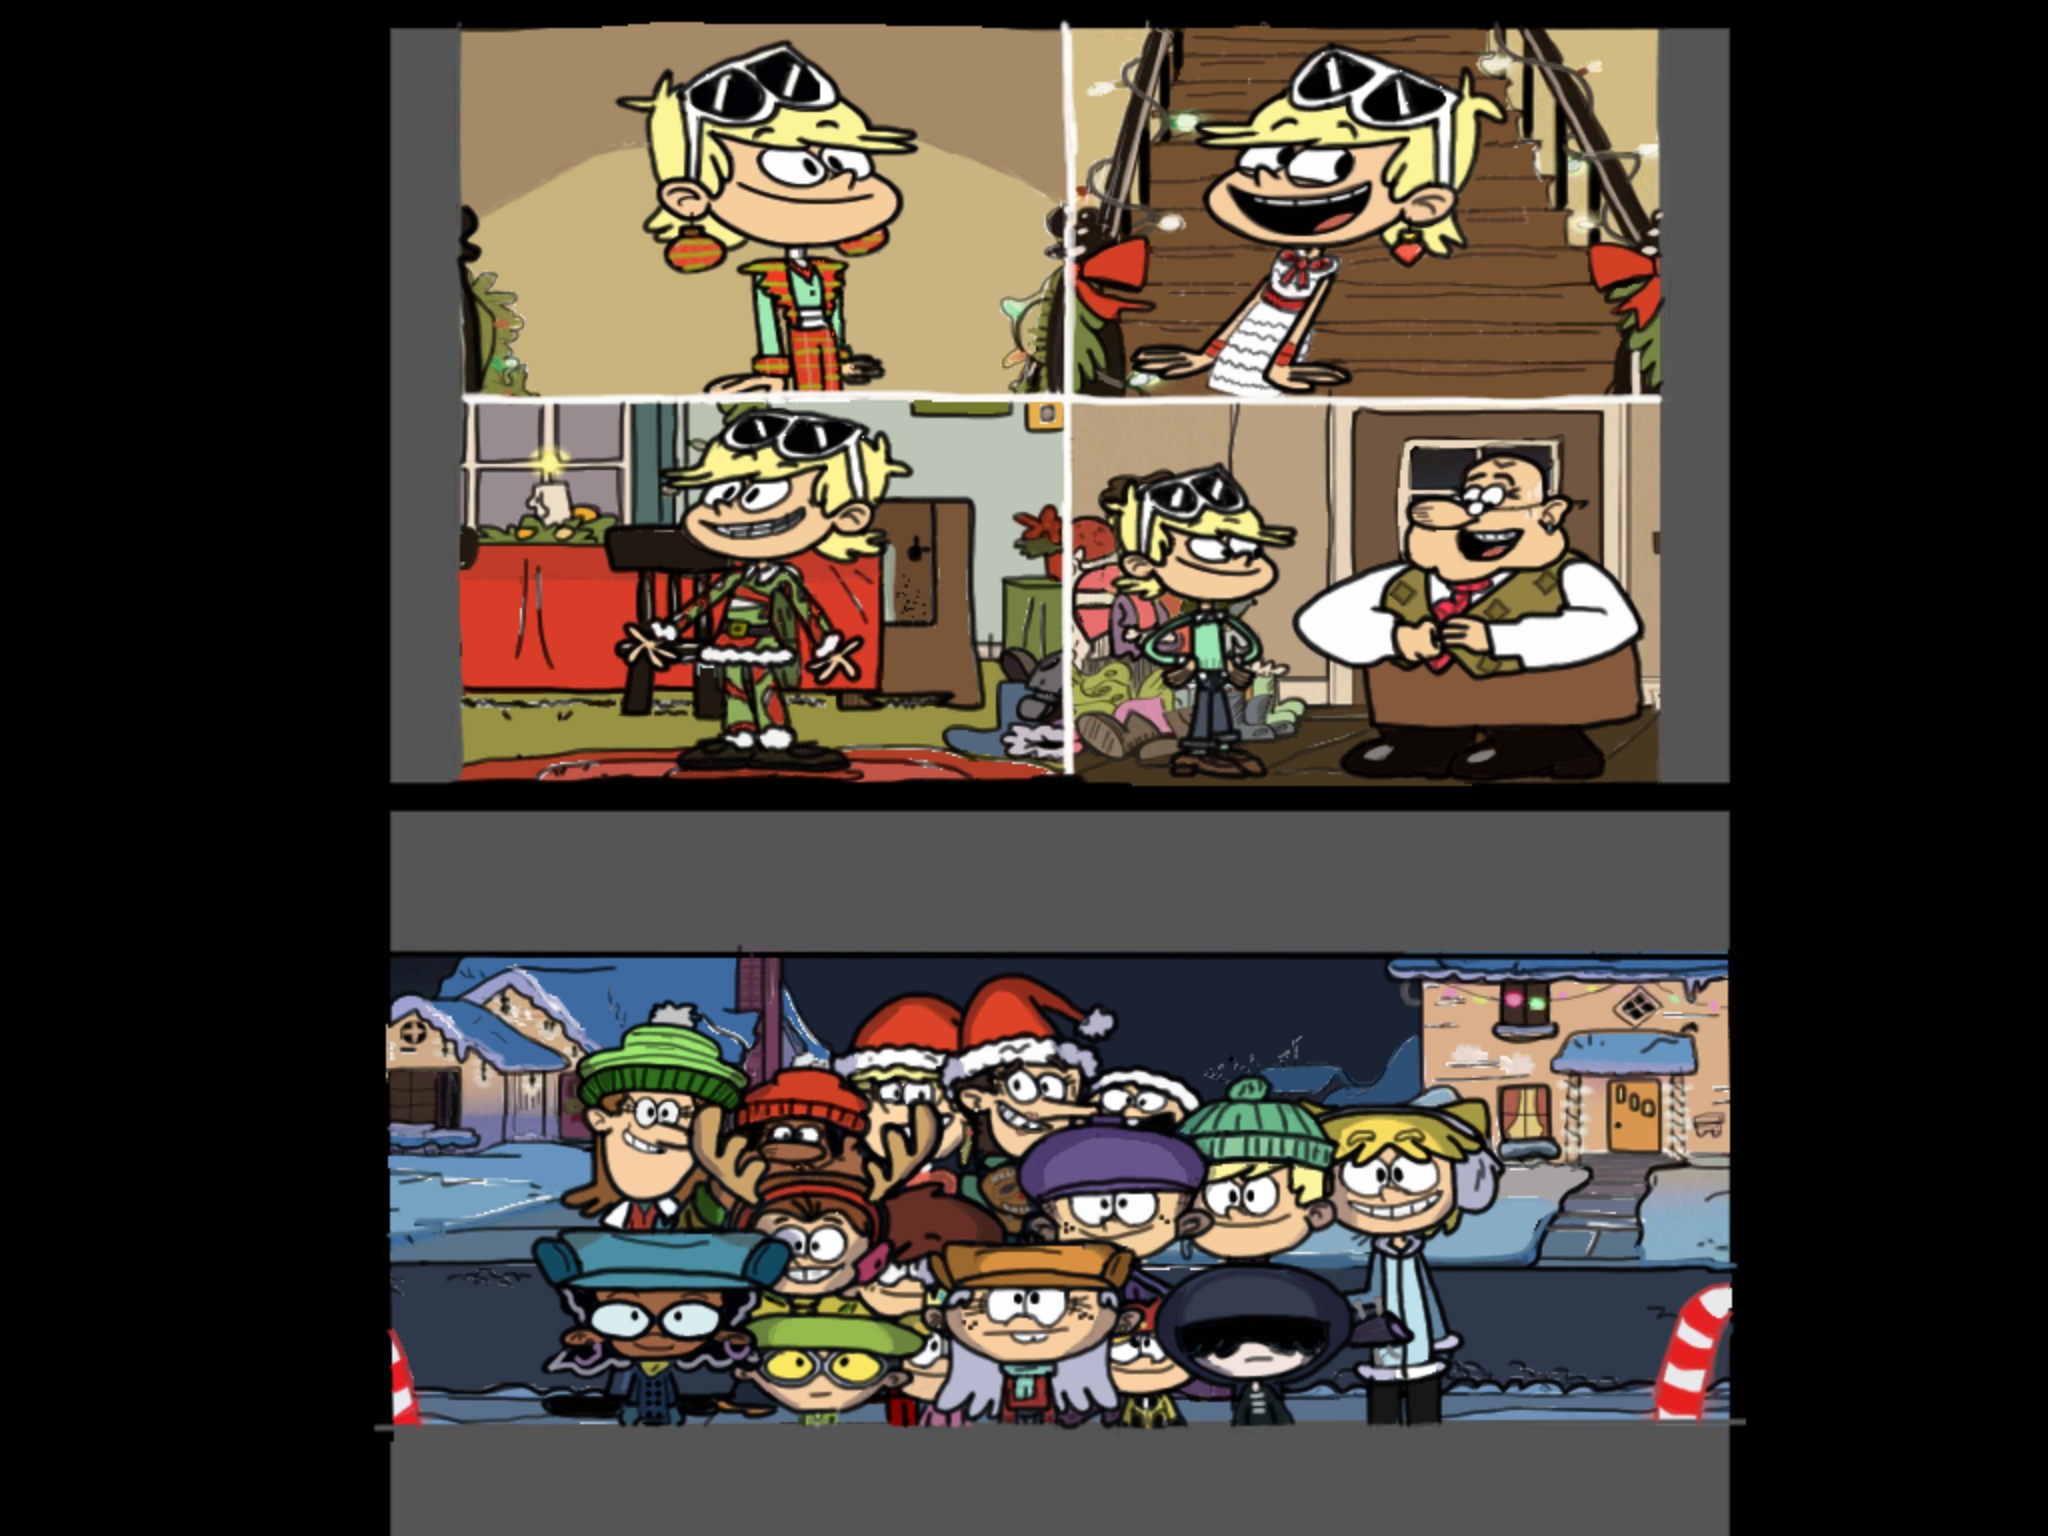 100+] The Loud House Wallpapers